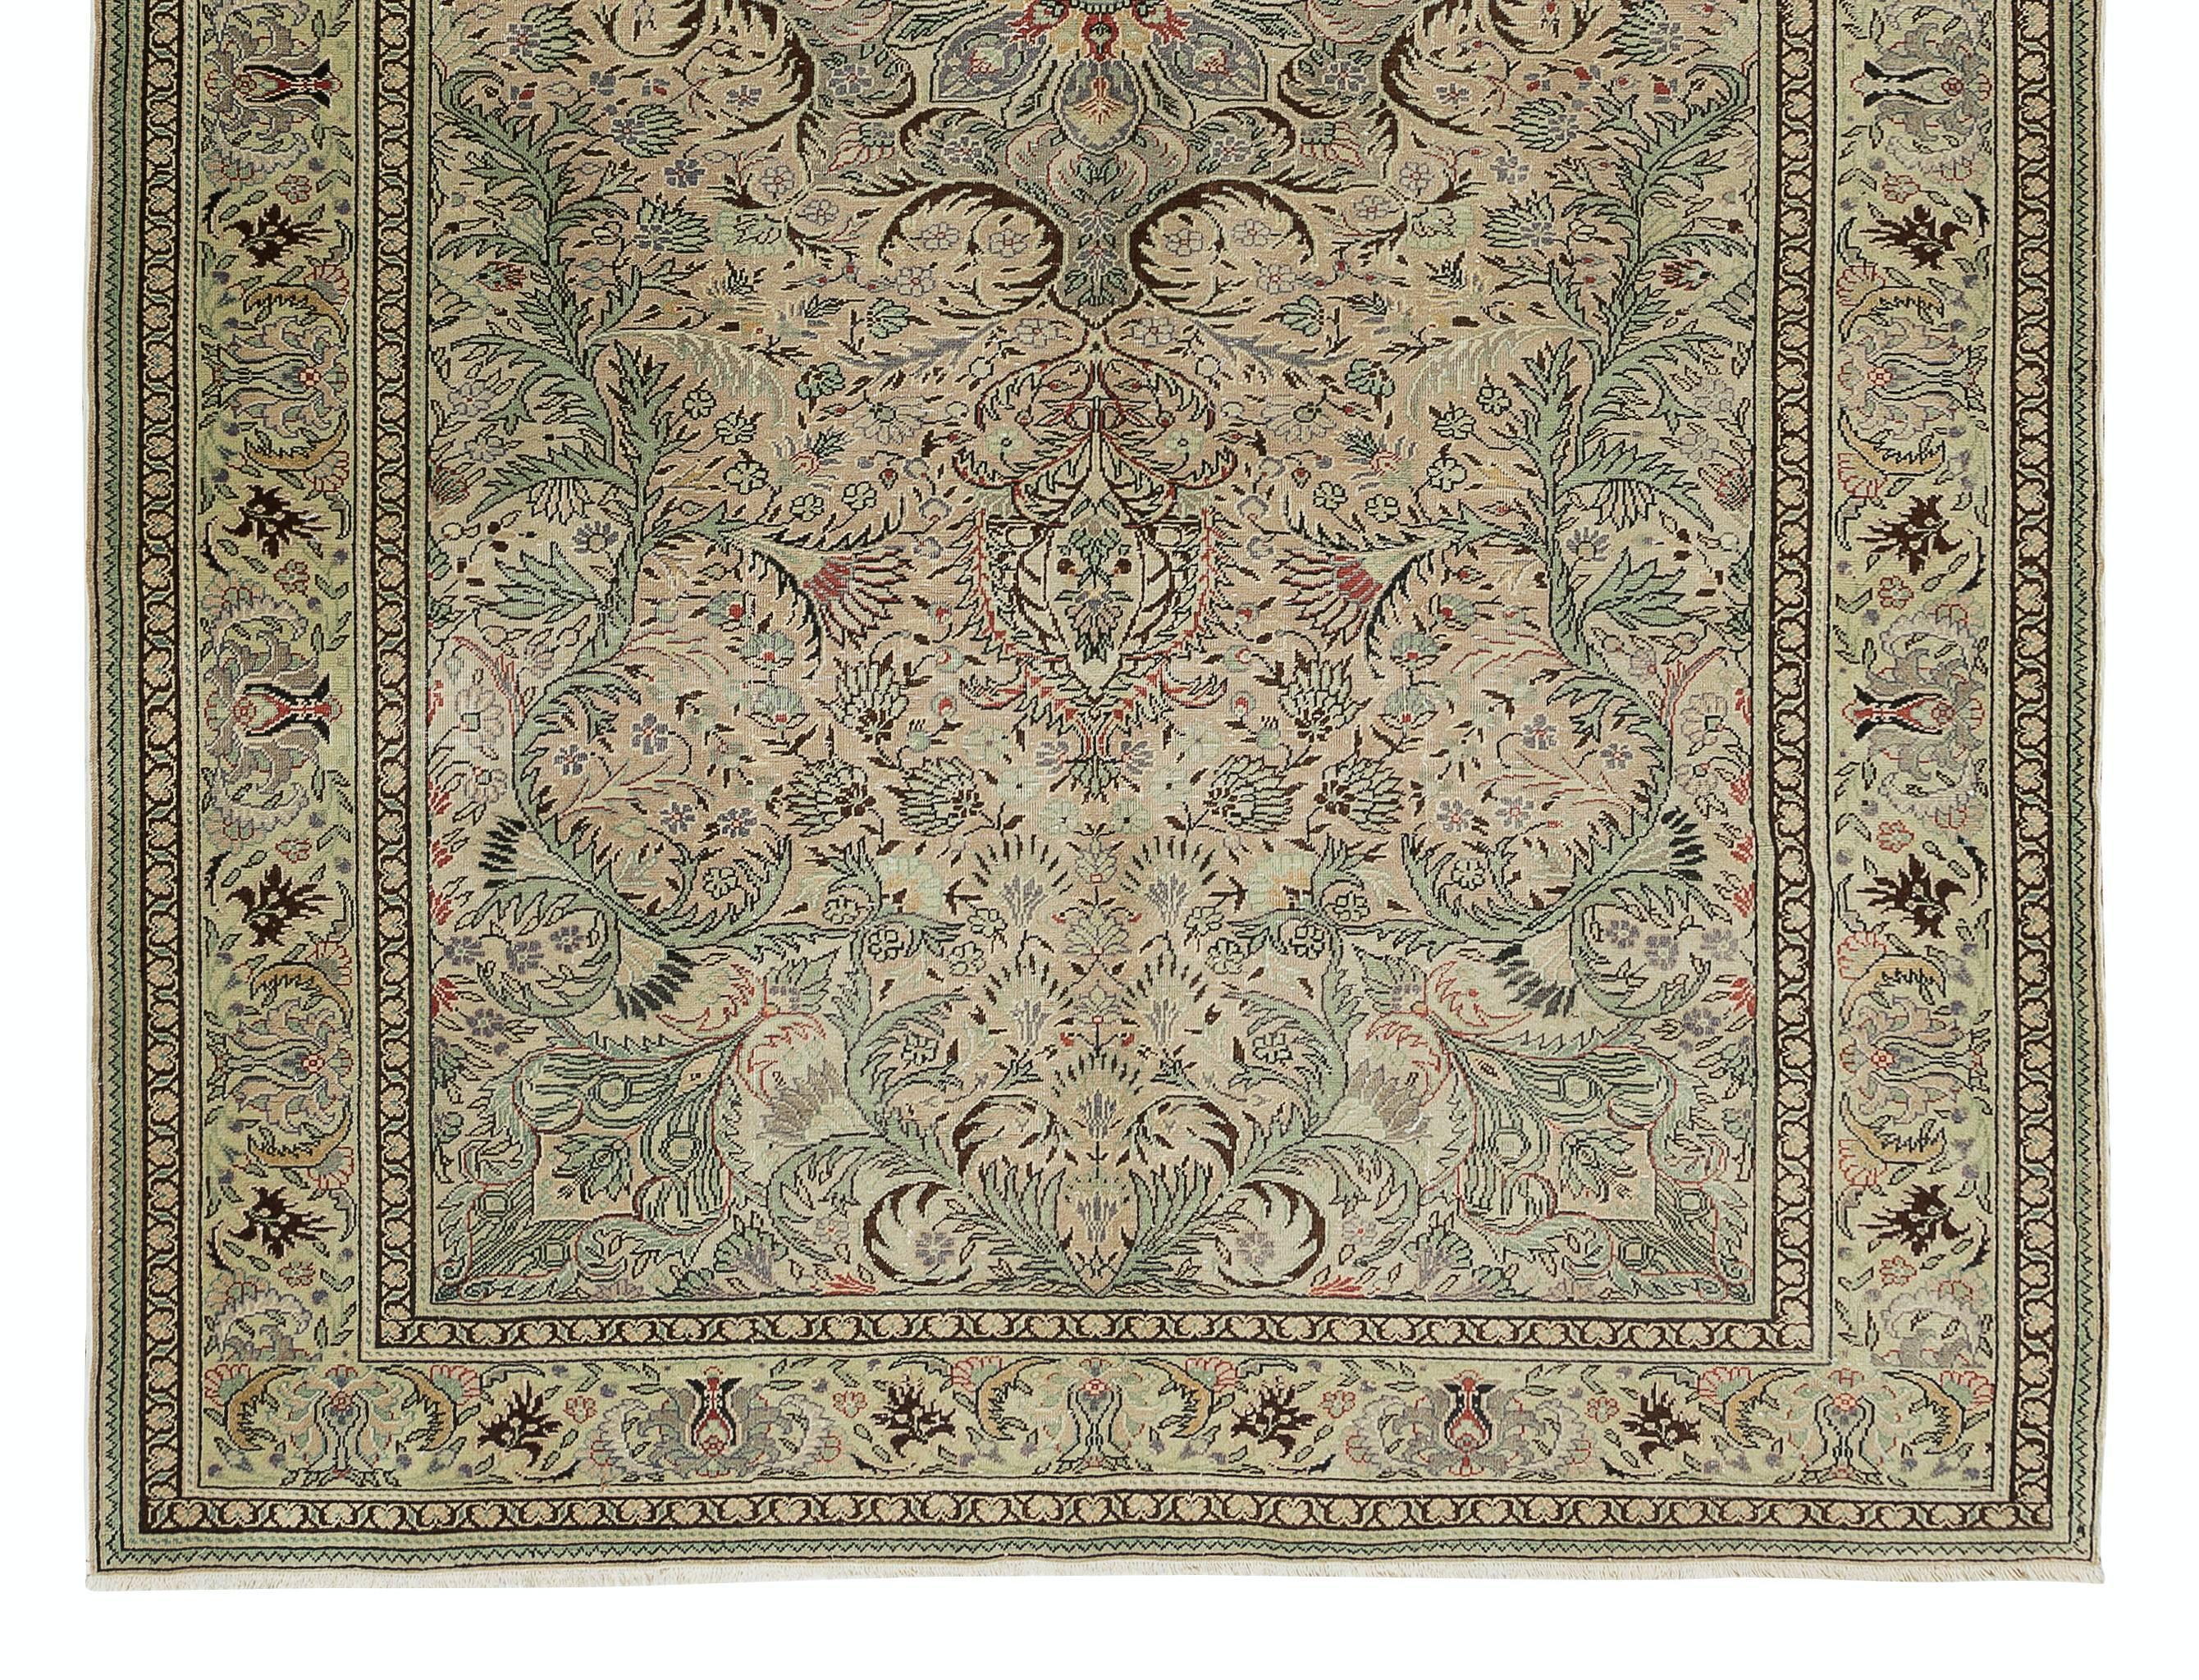 6.3x9.7 Ft Handmade Turkish Kayseri Area Rug, Medallion Design Carpet in Green In Excellent Condition For Sale In Philadelphia, PA